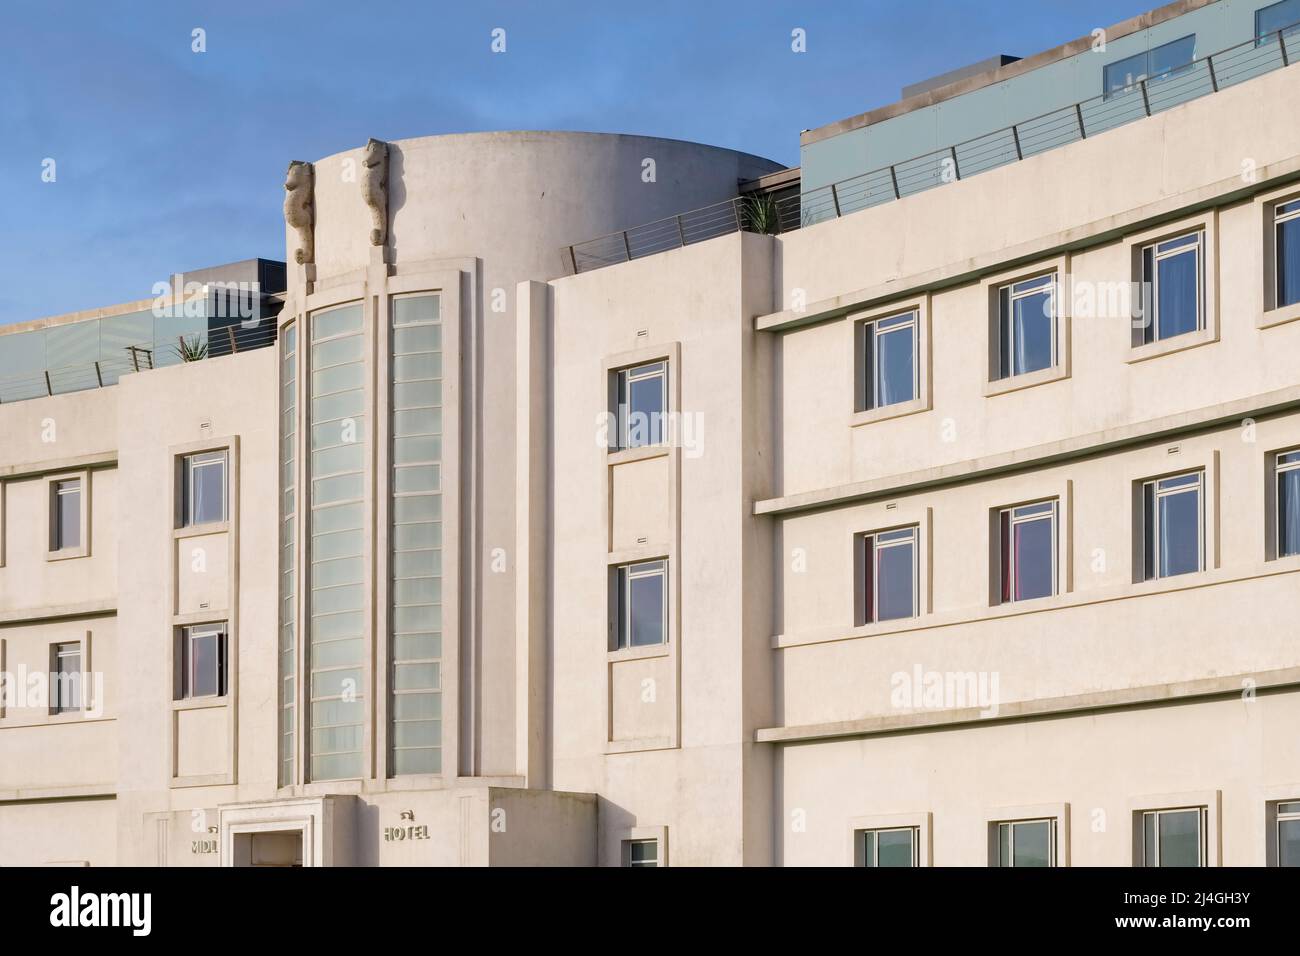 The Midland Hotel, built in 1933 in the Streamline Moderne style popular in the decade, Morecambe, Lancashire, England Stock Photo